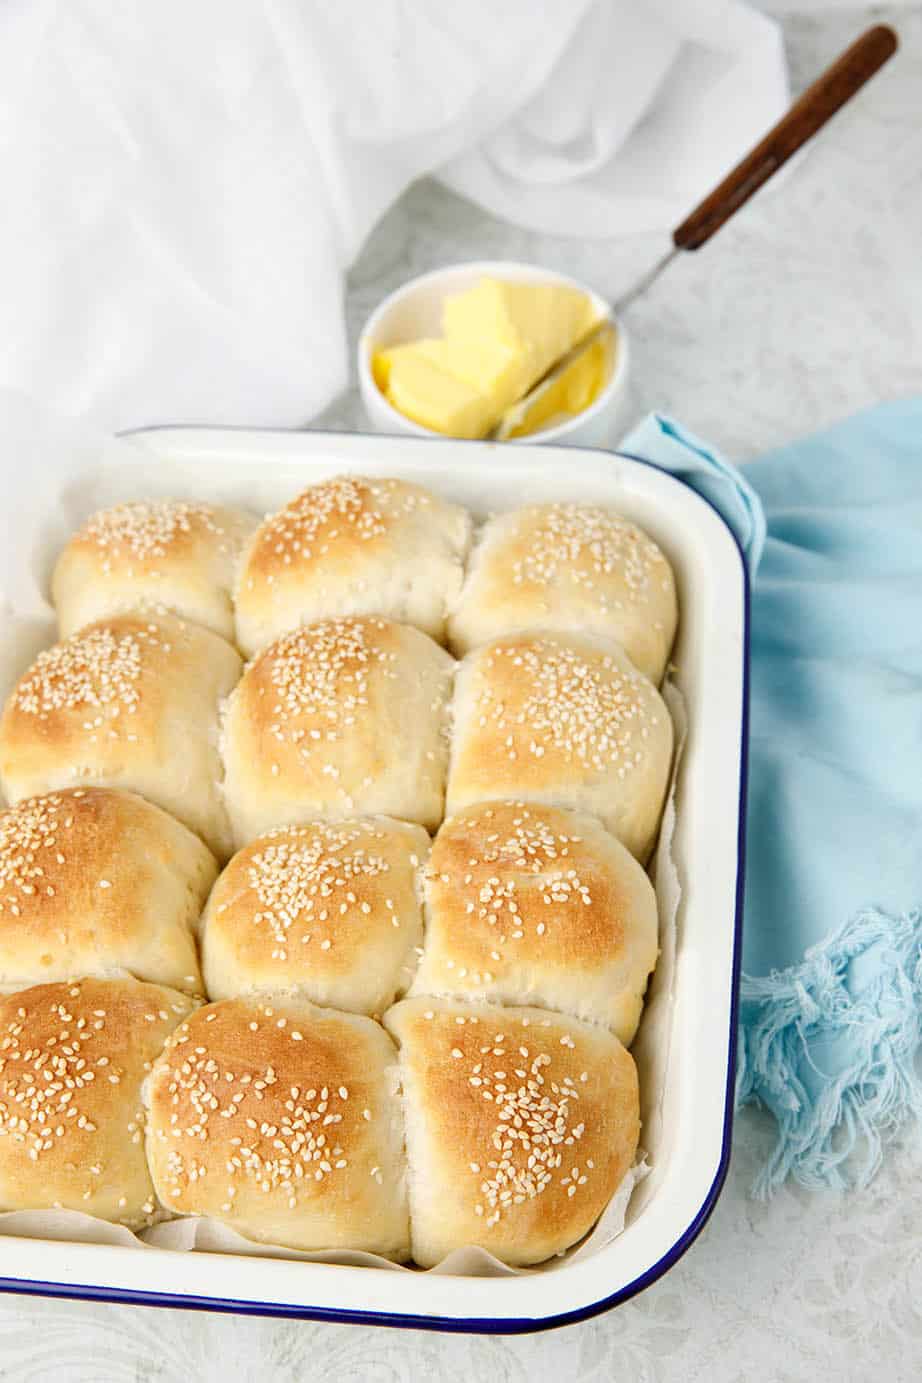 Bread recipe used to make white bread rolls. Image photographed on a ligh background with light blue napkinrolls